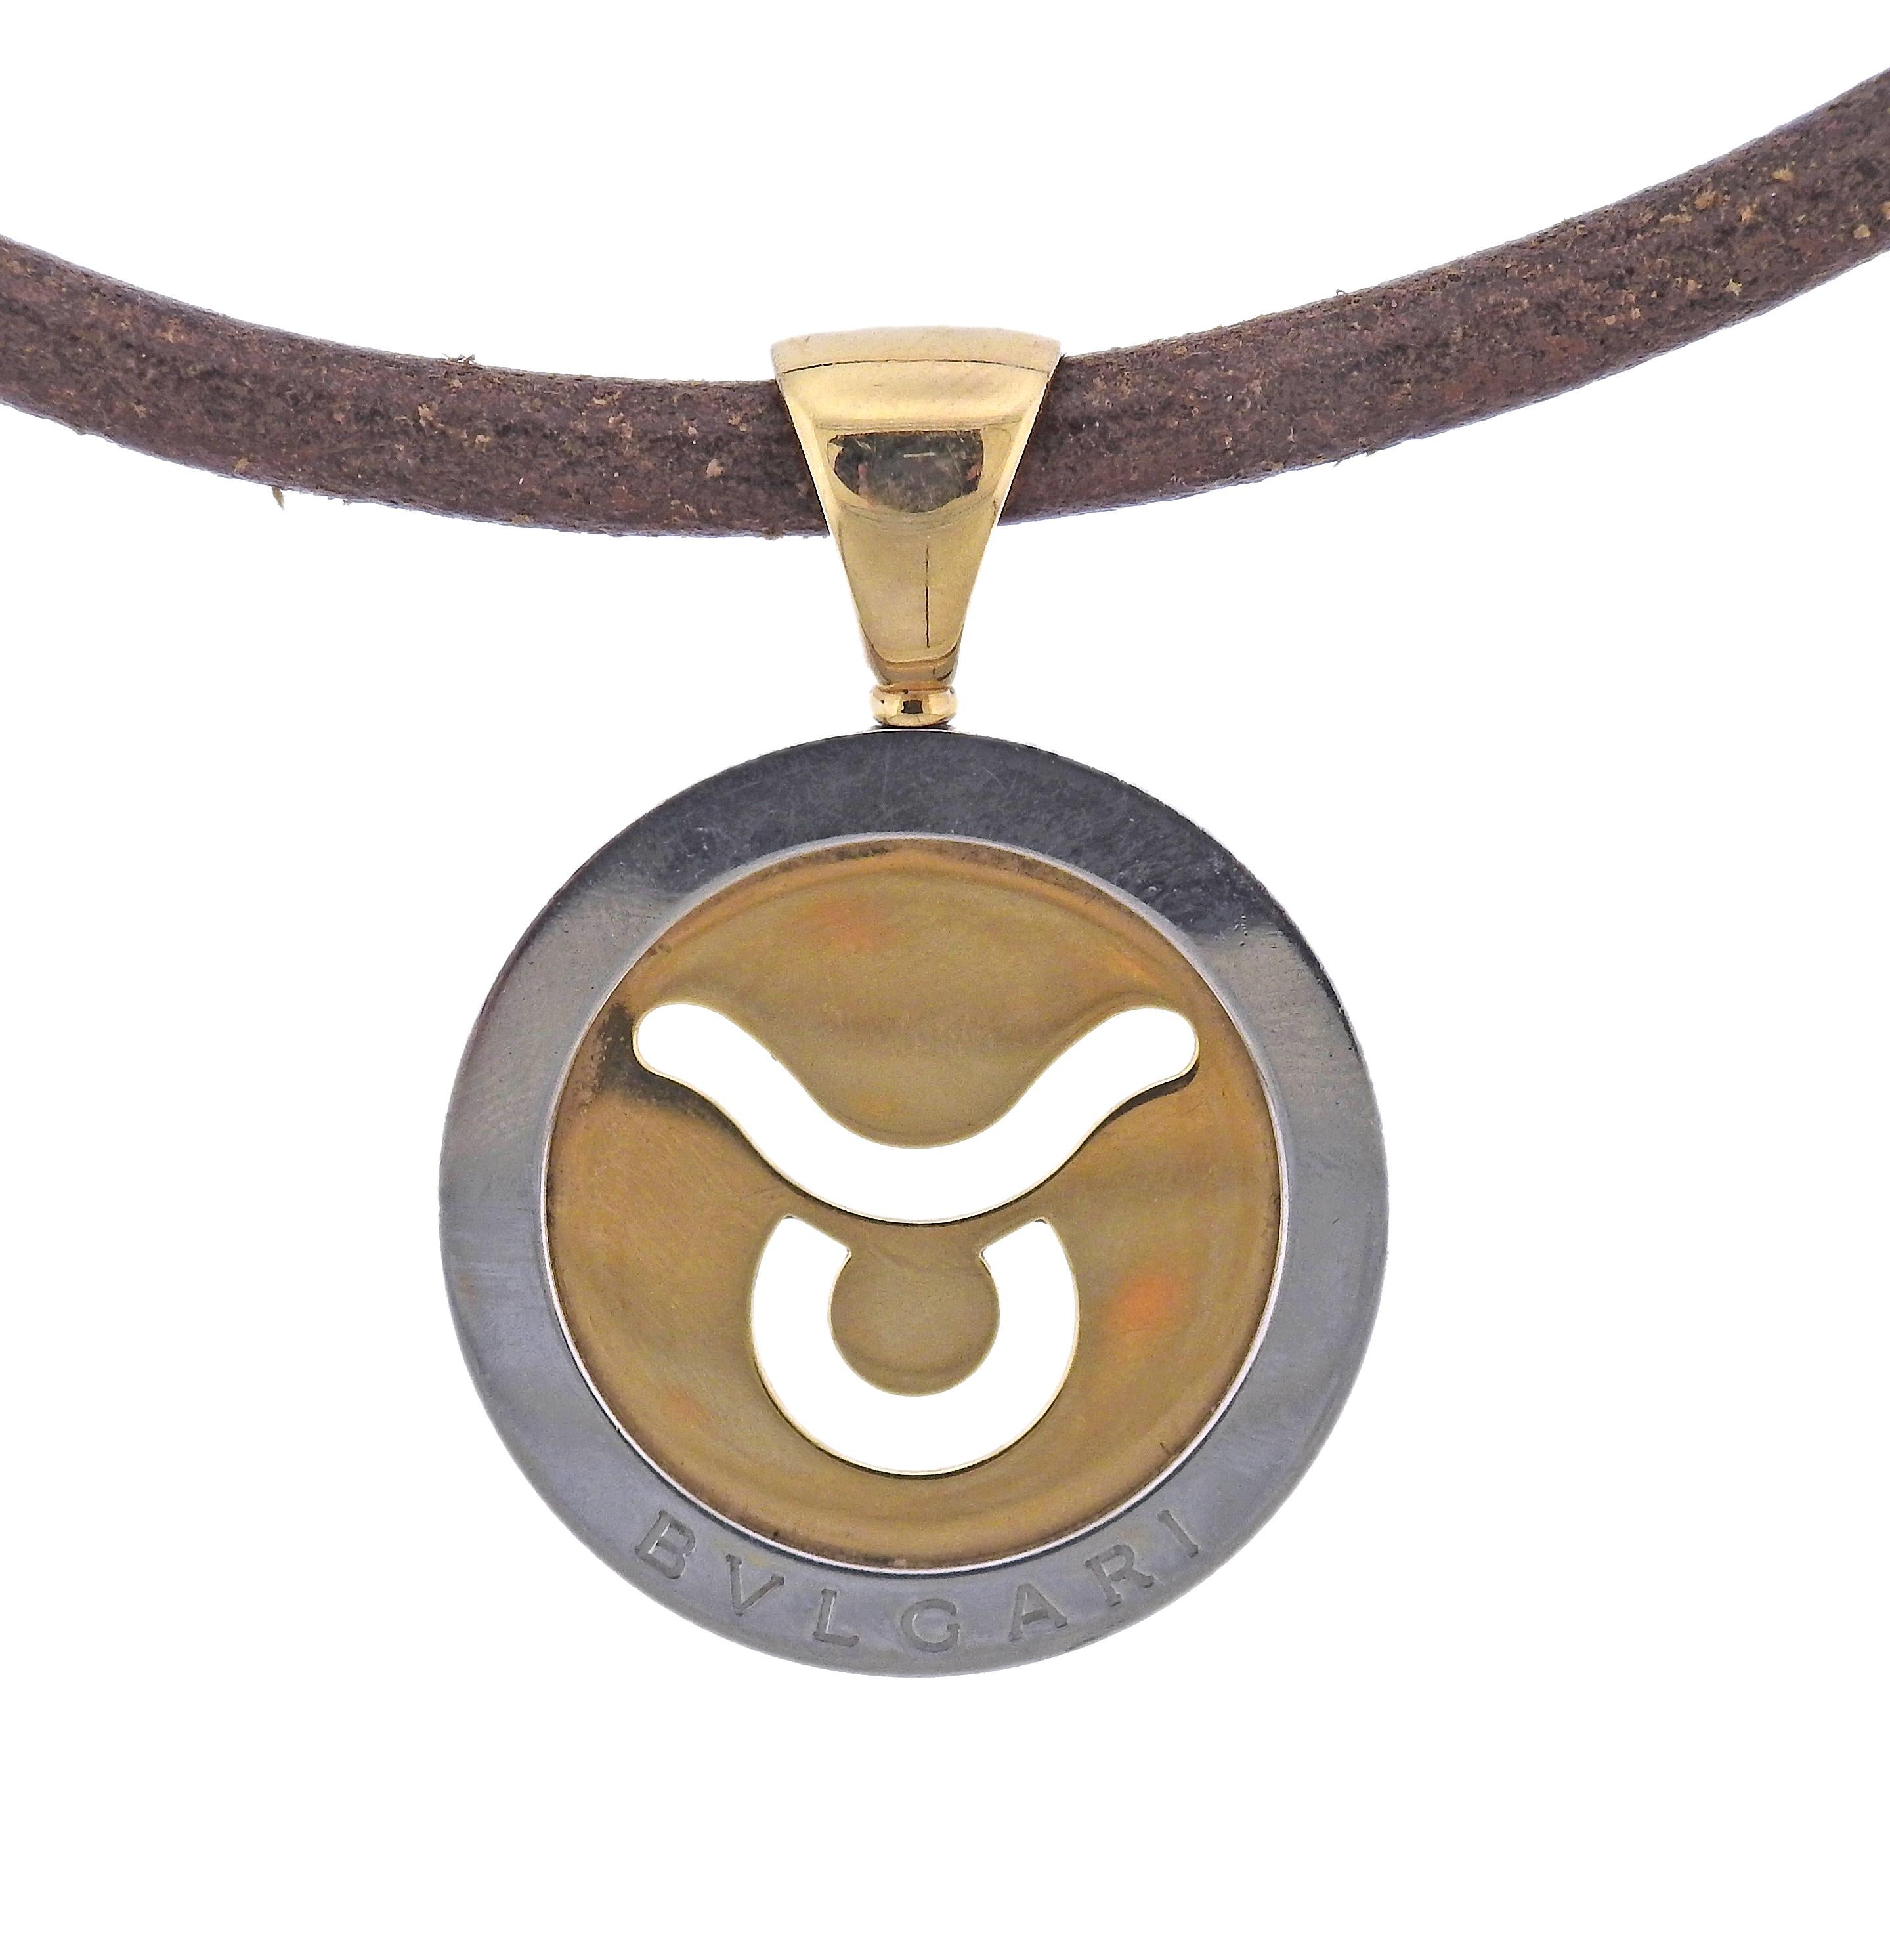 18k gold and stainless steel Tondo Taurus pendant by Bvlgari, on a brown leather and 18k gold cord necklace. Necklace is 15